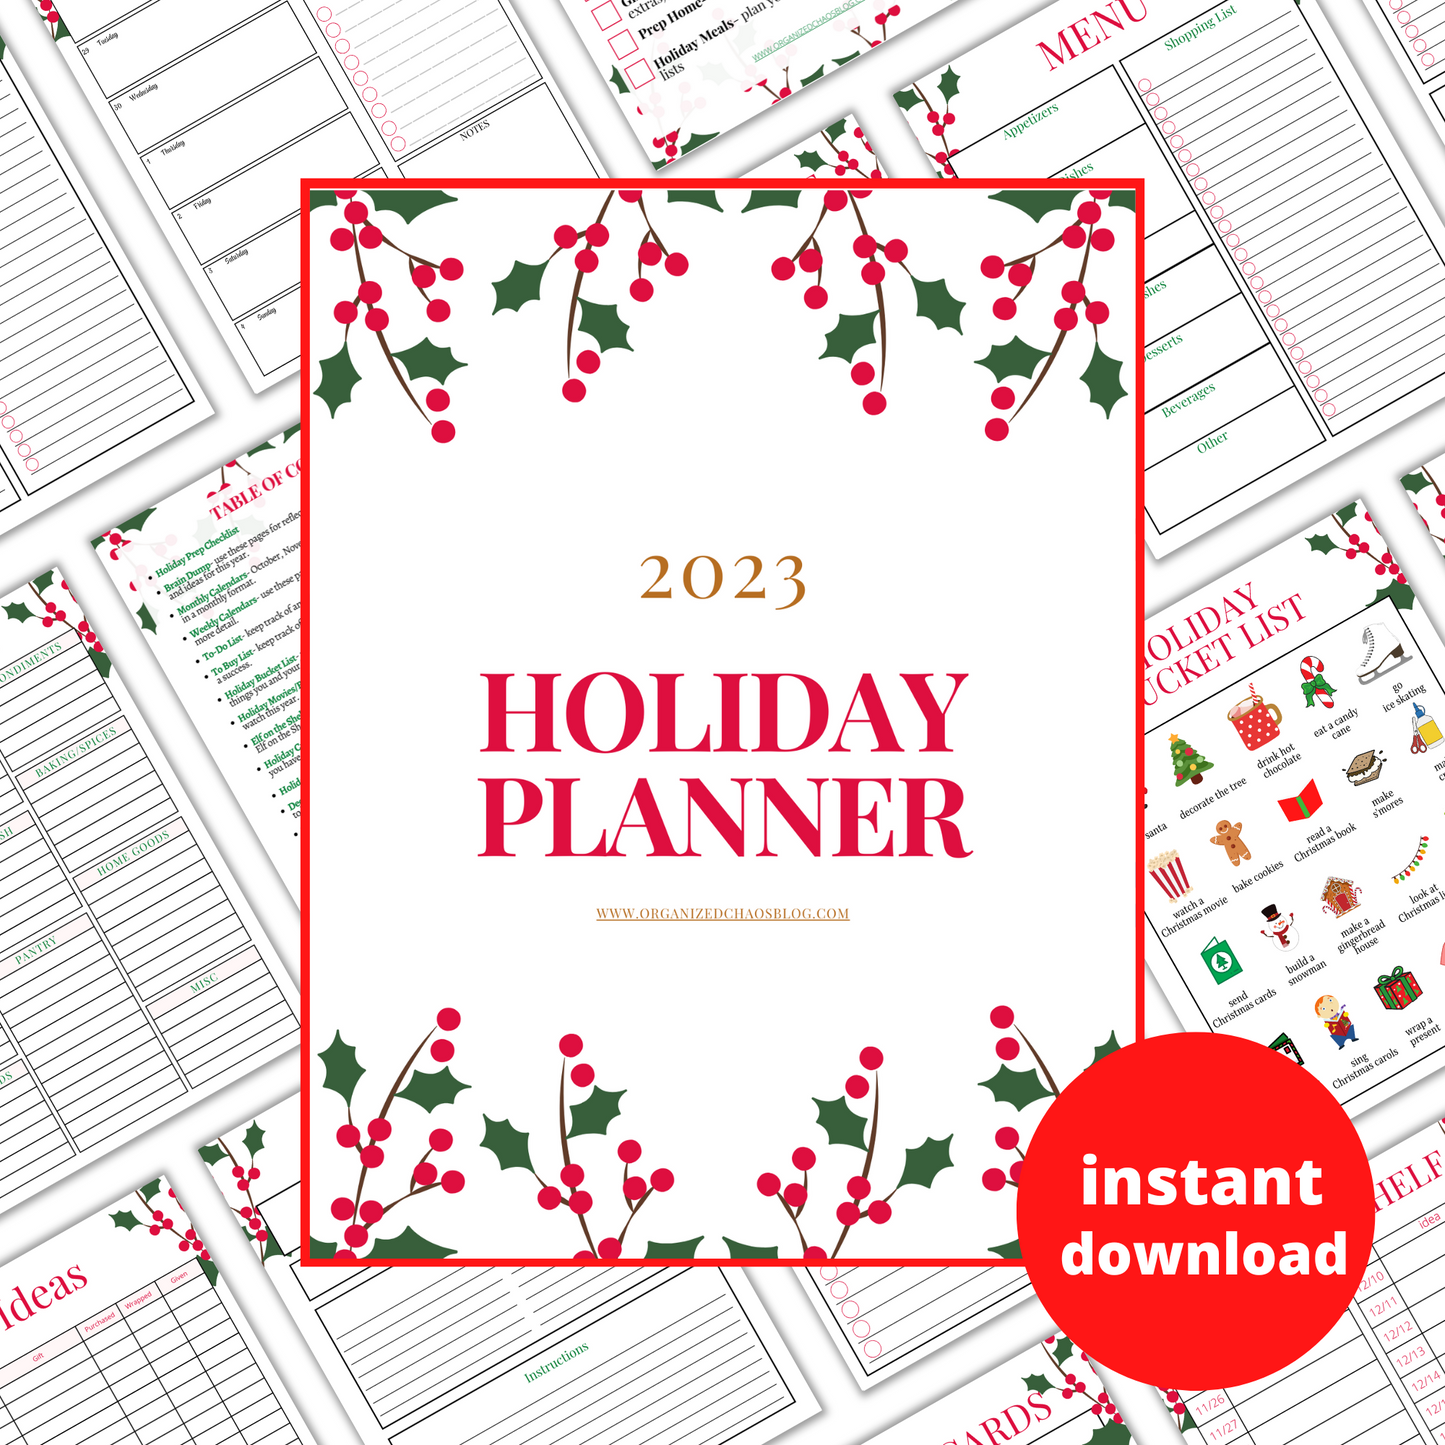 2023 Holiday Planner